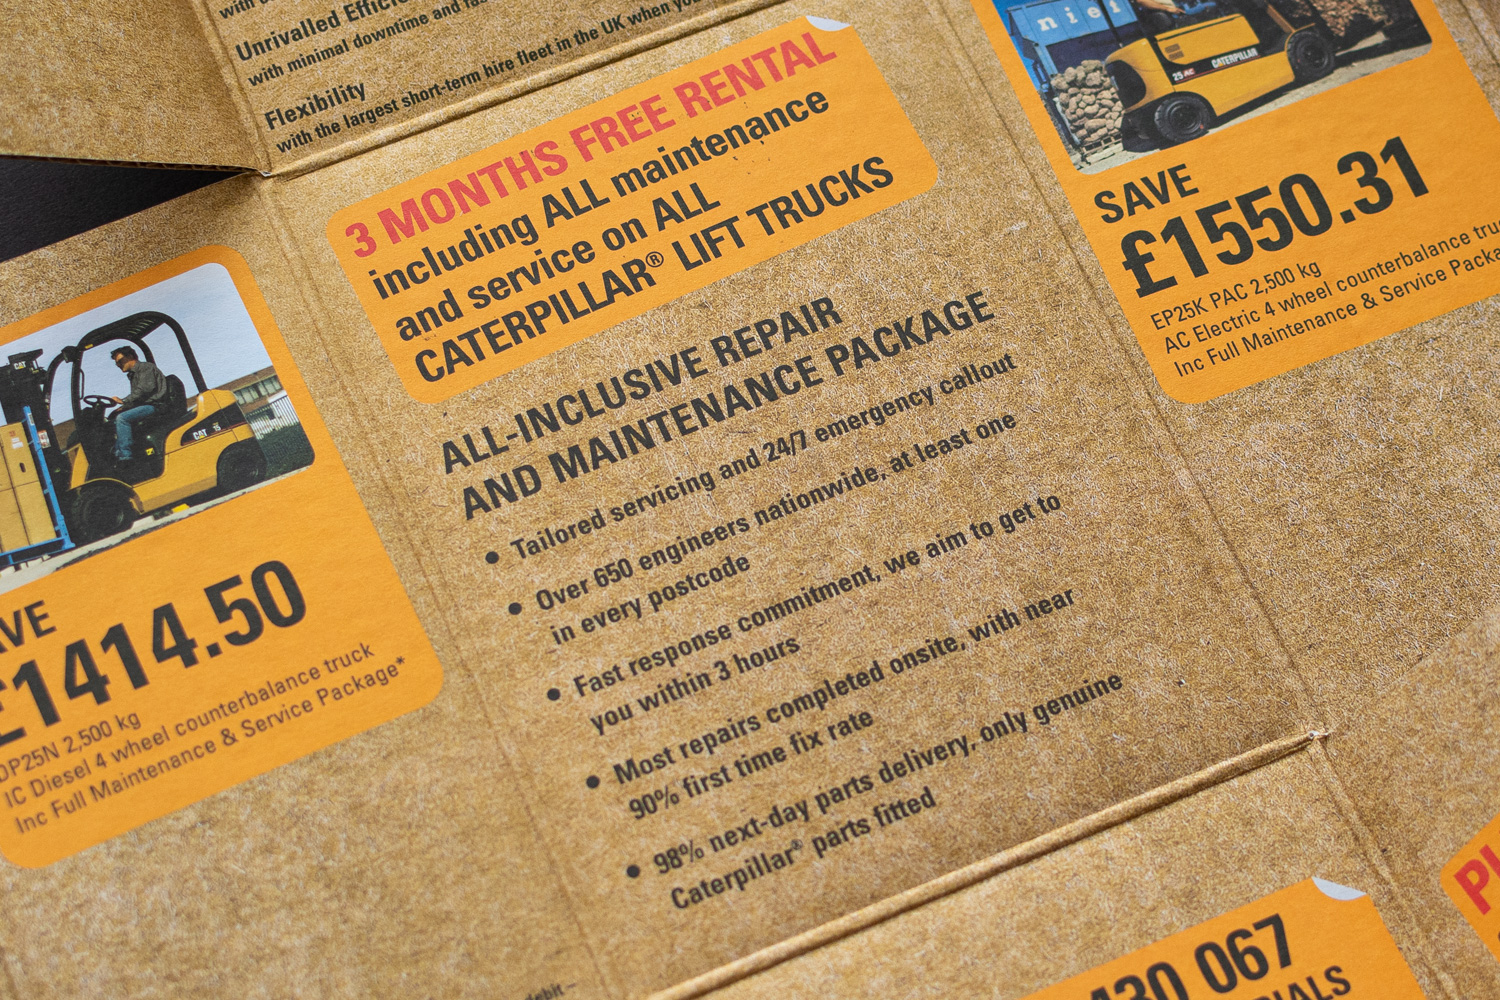 Finning CAT mailer opened showing detail of offer